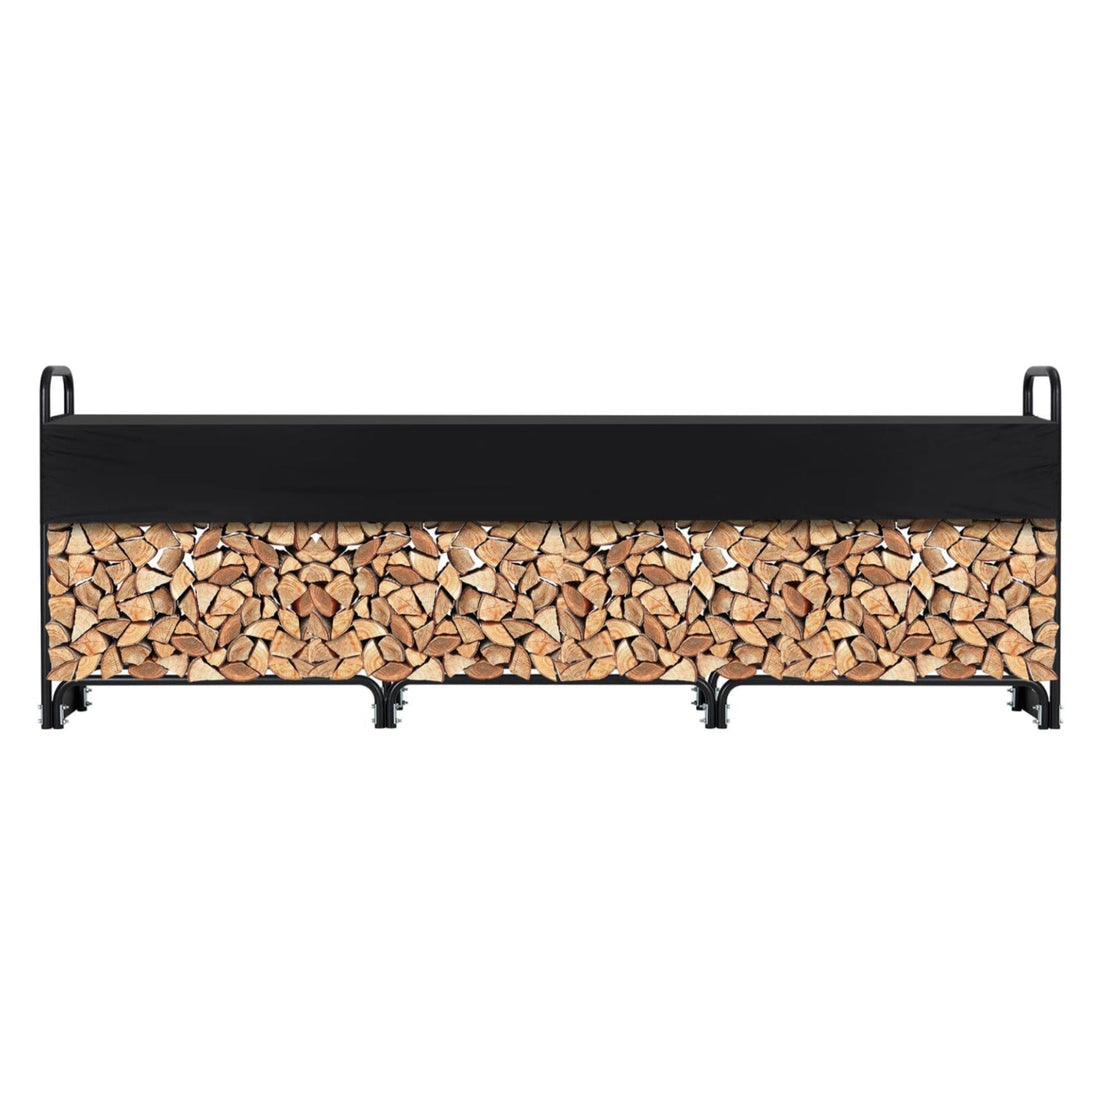 GARVEE 12FT Firewood Rack Outdoor Firewood Rack Outdoor with Cover for Fireplace Wood Storage